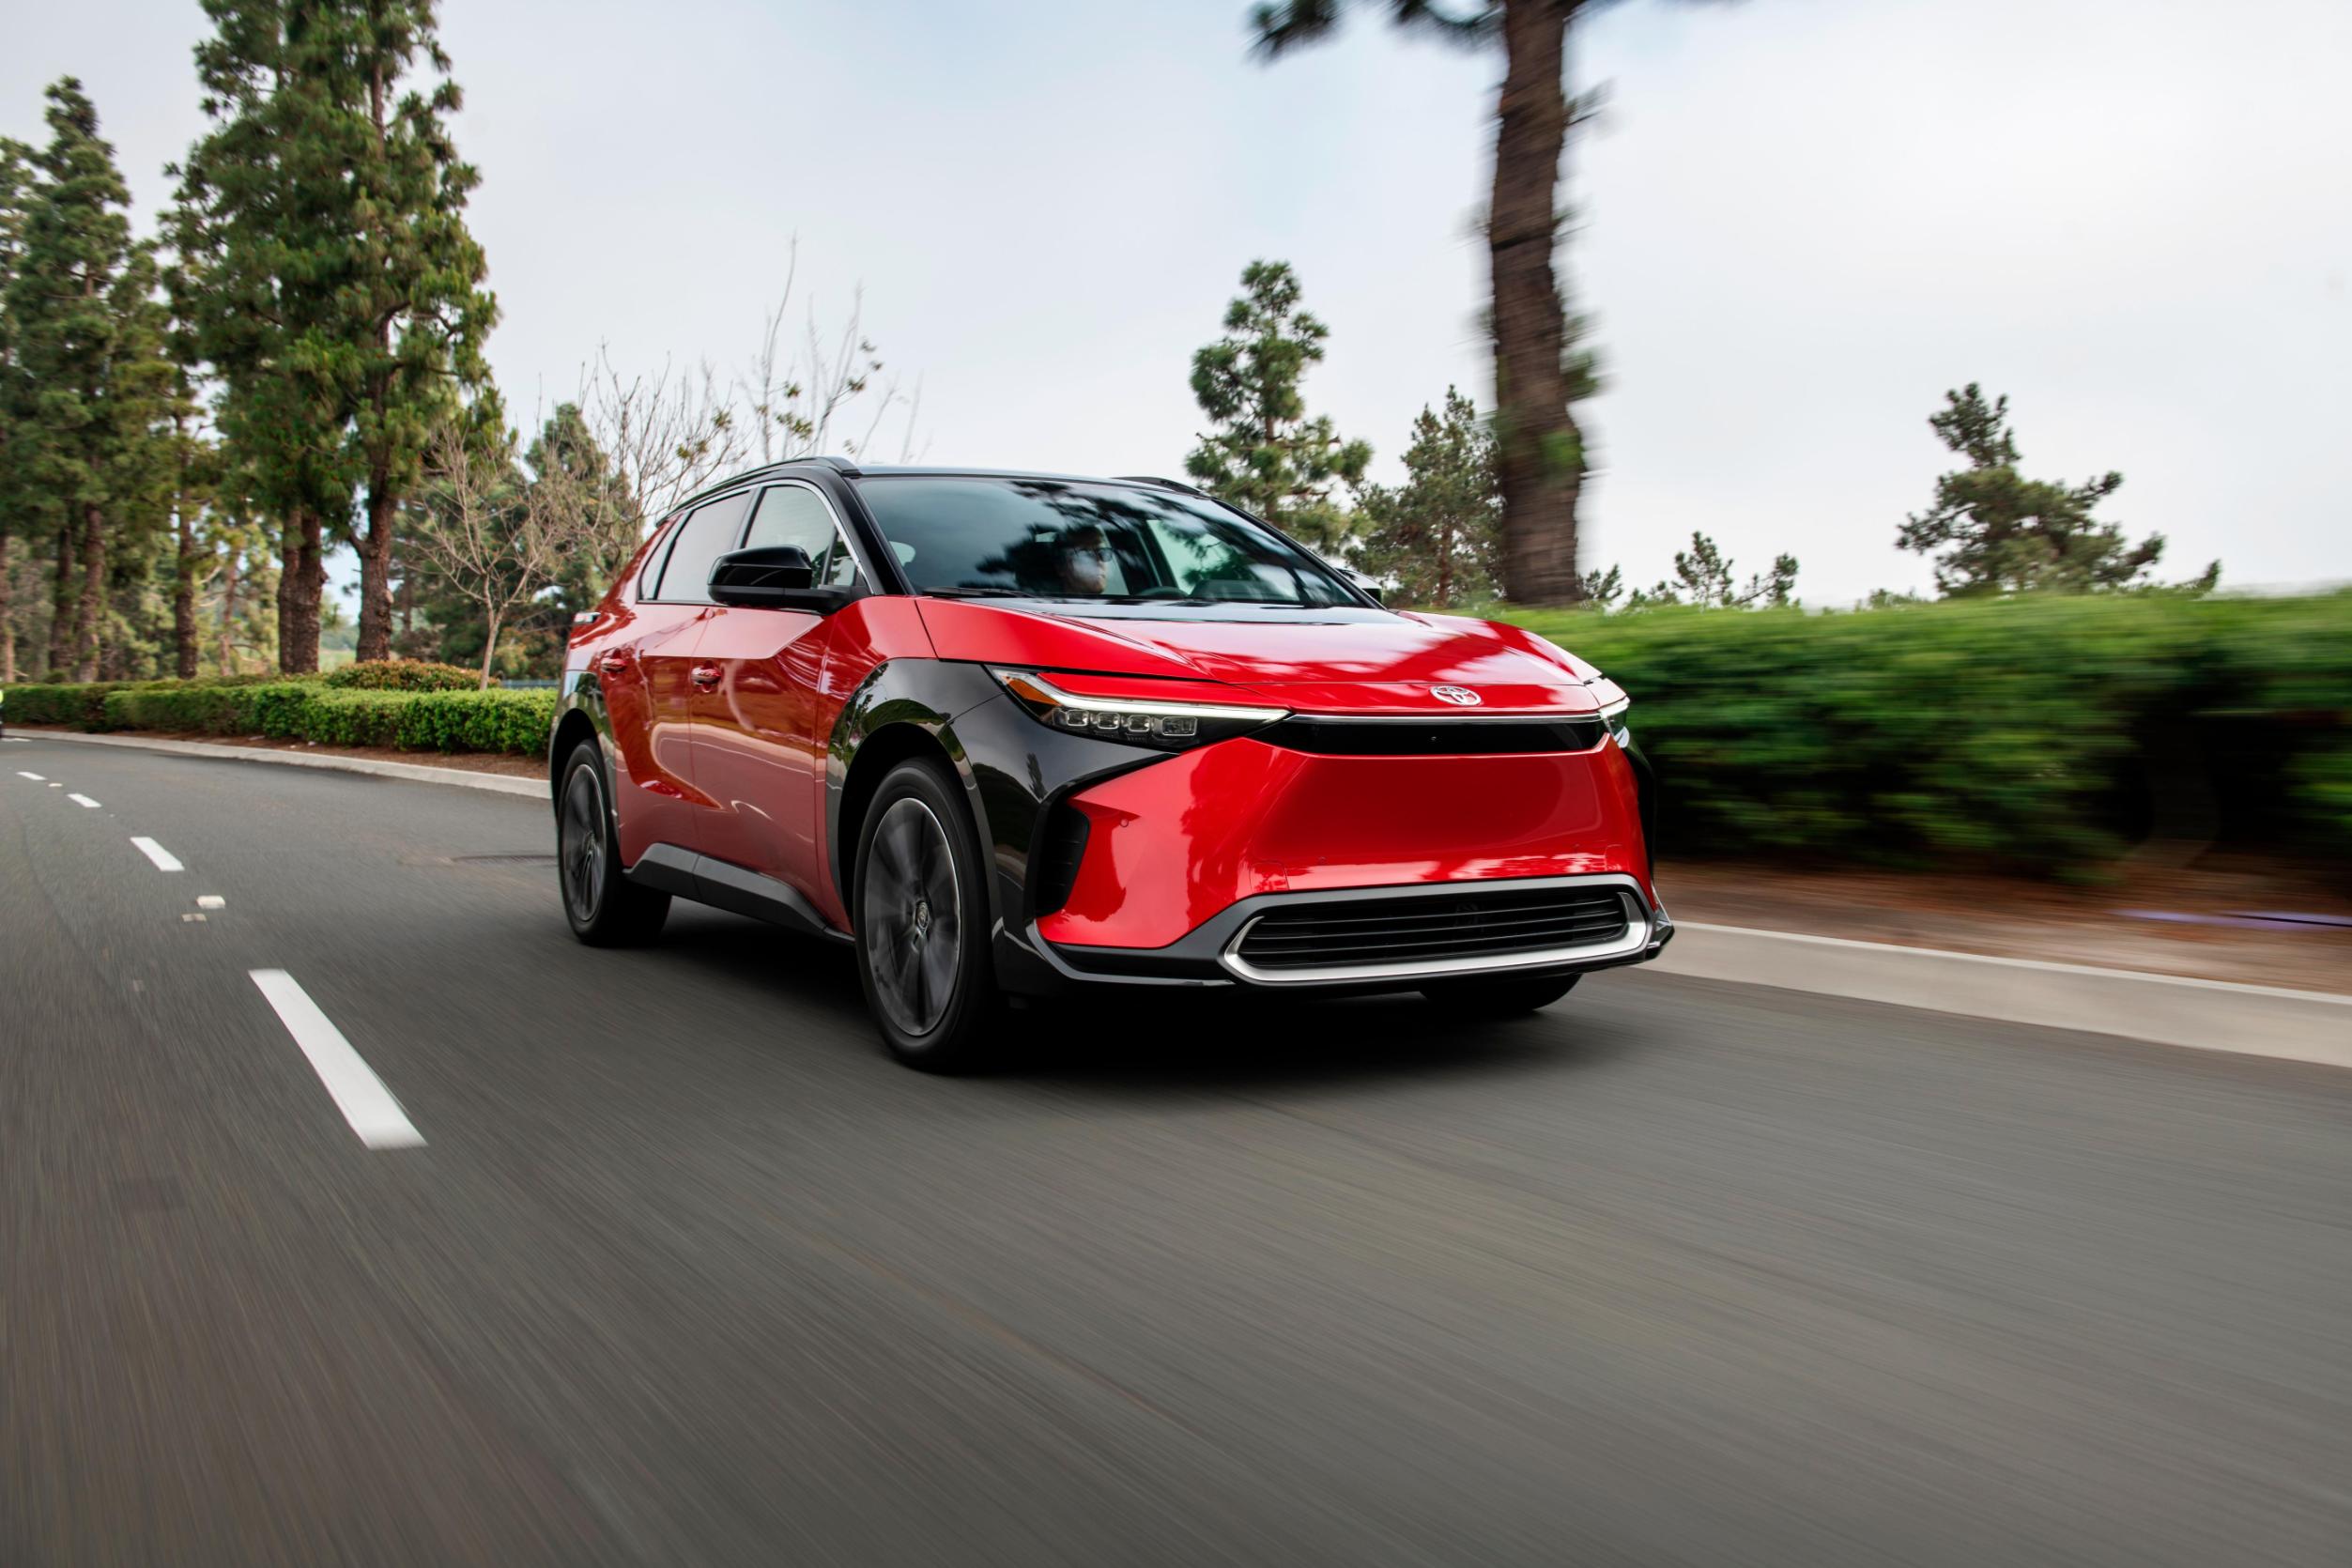 Toyota Is Offering To Buy Back An Electric SUV Because Its Wheels Could Fall Off – Tampa Bay Now